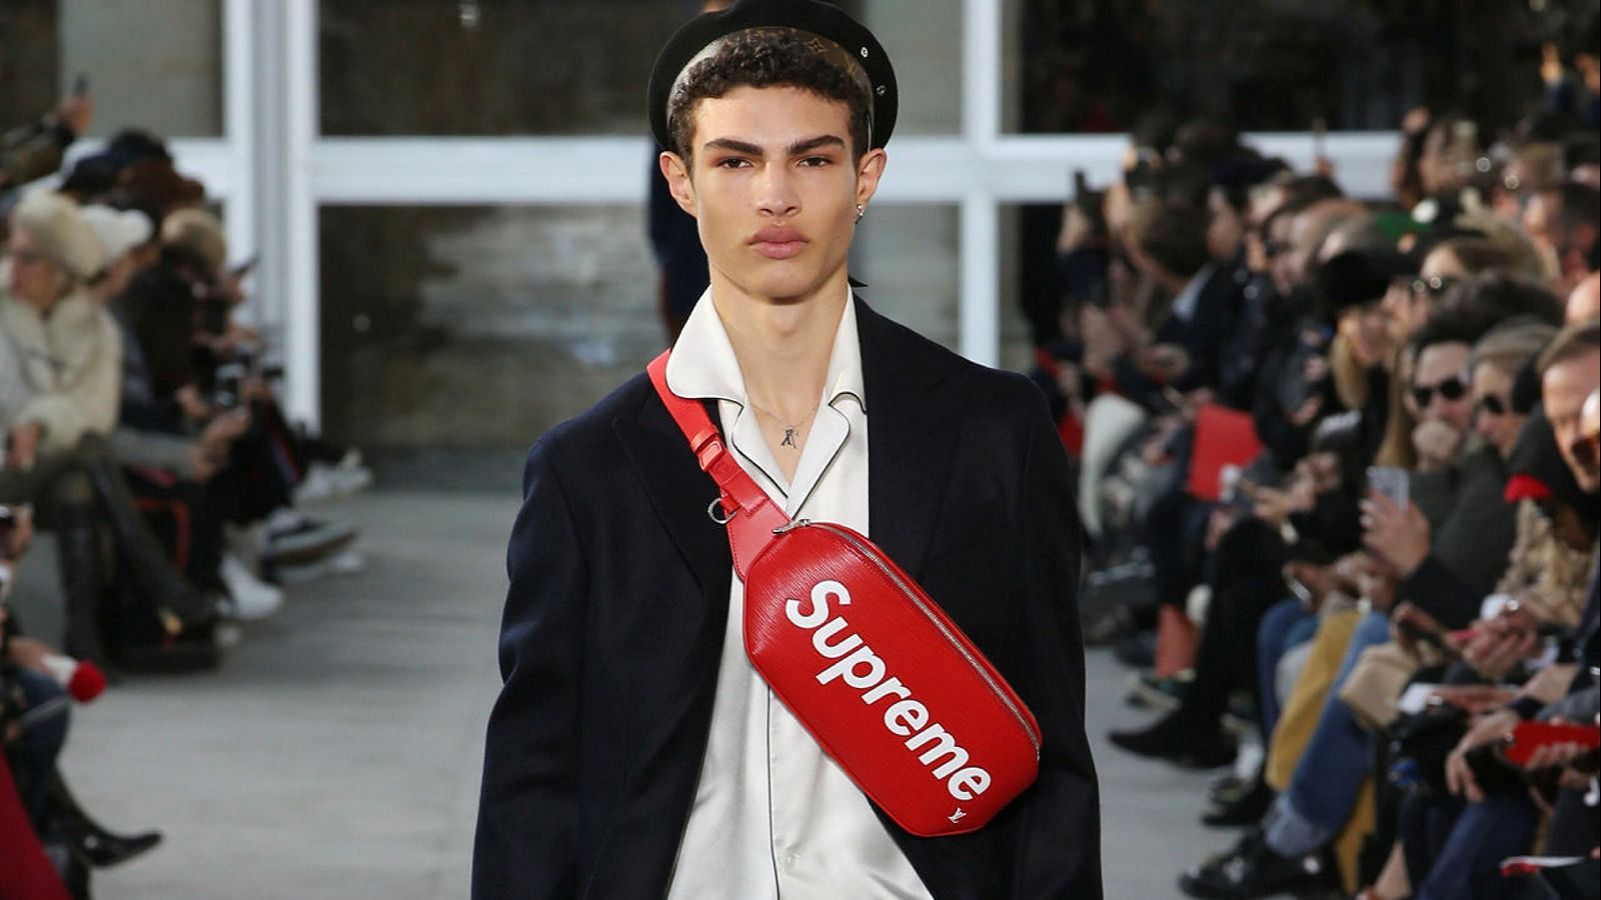 Tremaine Emory: The new Creative Director of Supreme